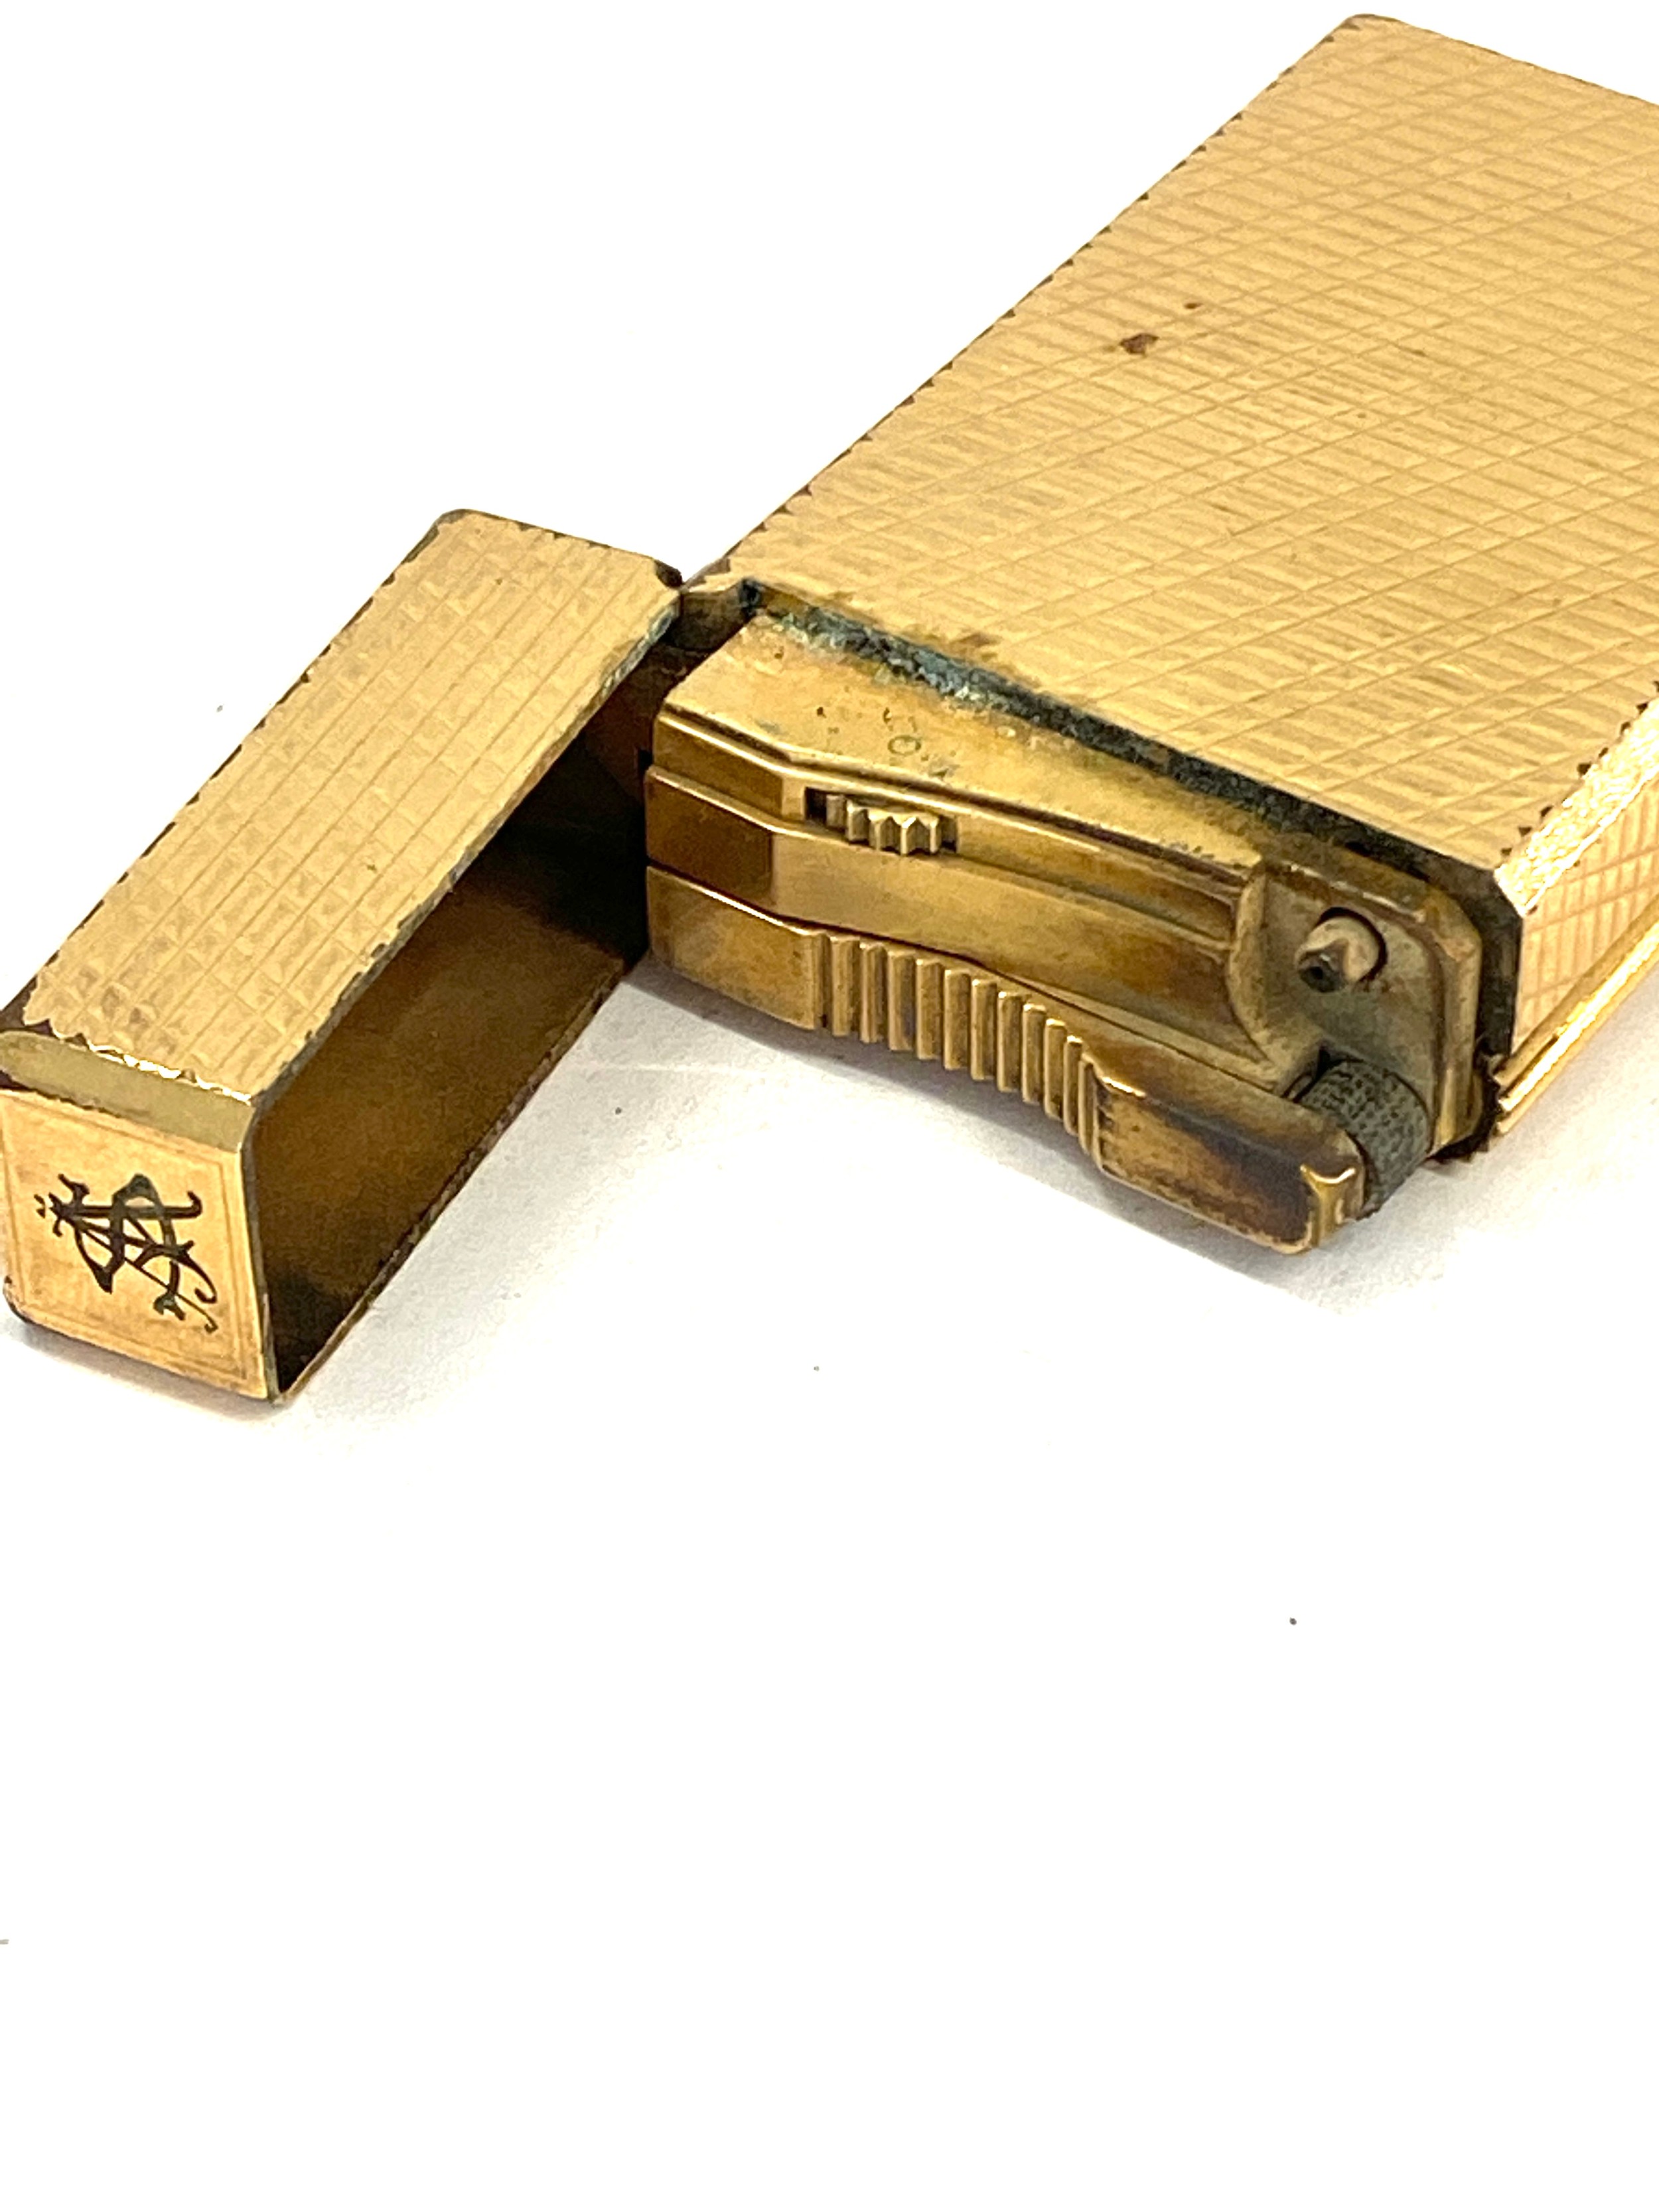 Gold plated cigarette lighter by Dupont Paris - Image 4 of 4